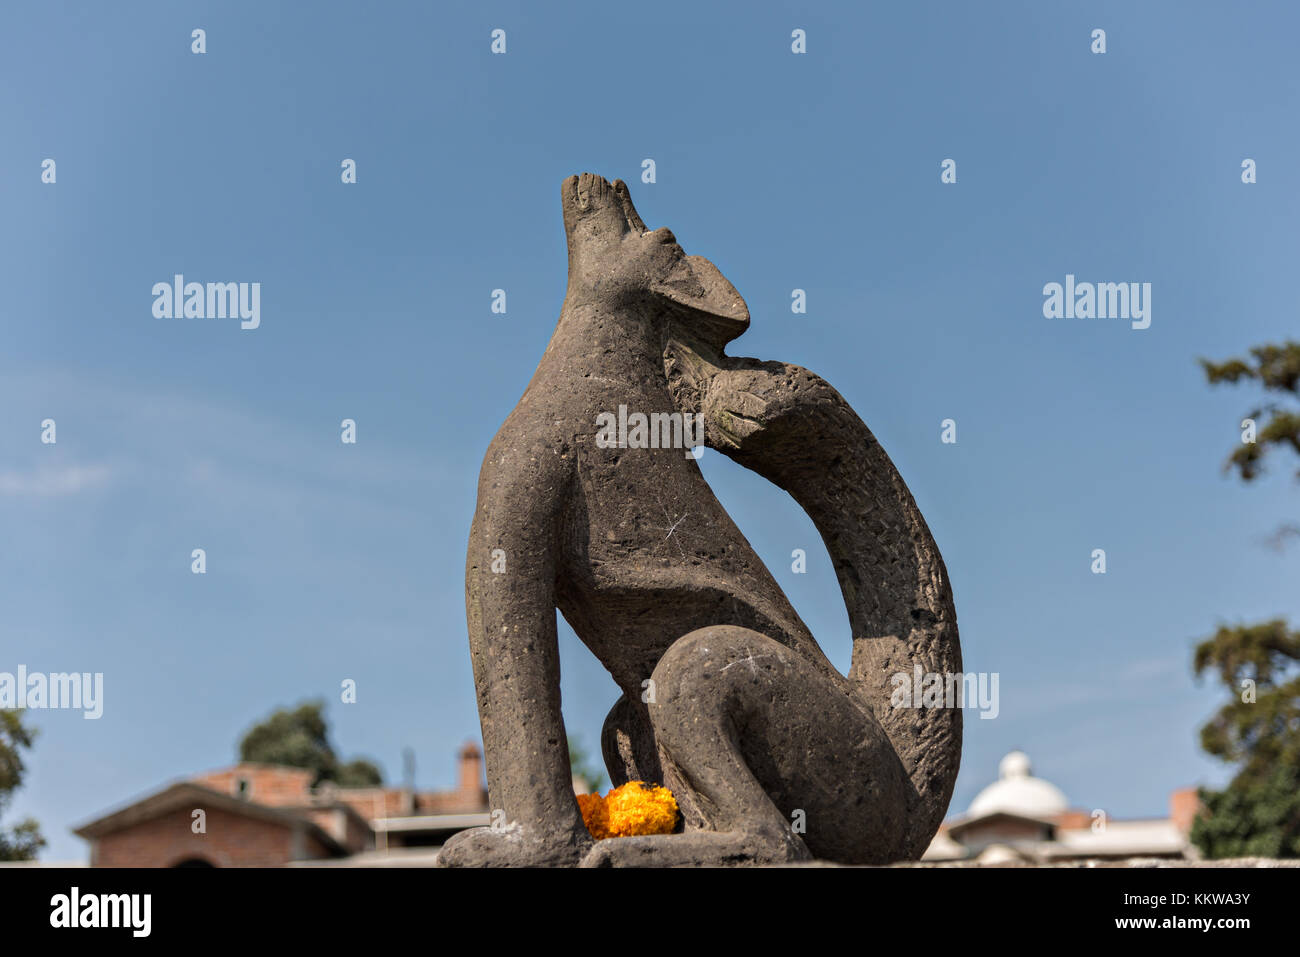 A sculpture of a coyote decorates the town square in the tiny Purepecha town of Ihuatzio, Michoacan, Mexico. Stock Photo